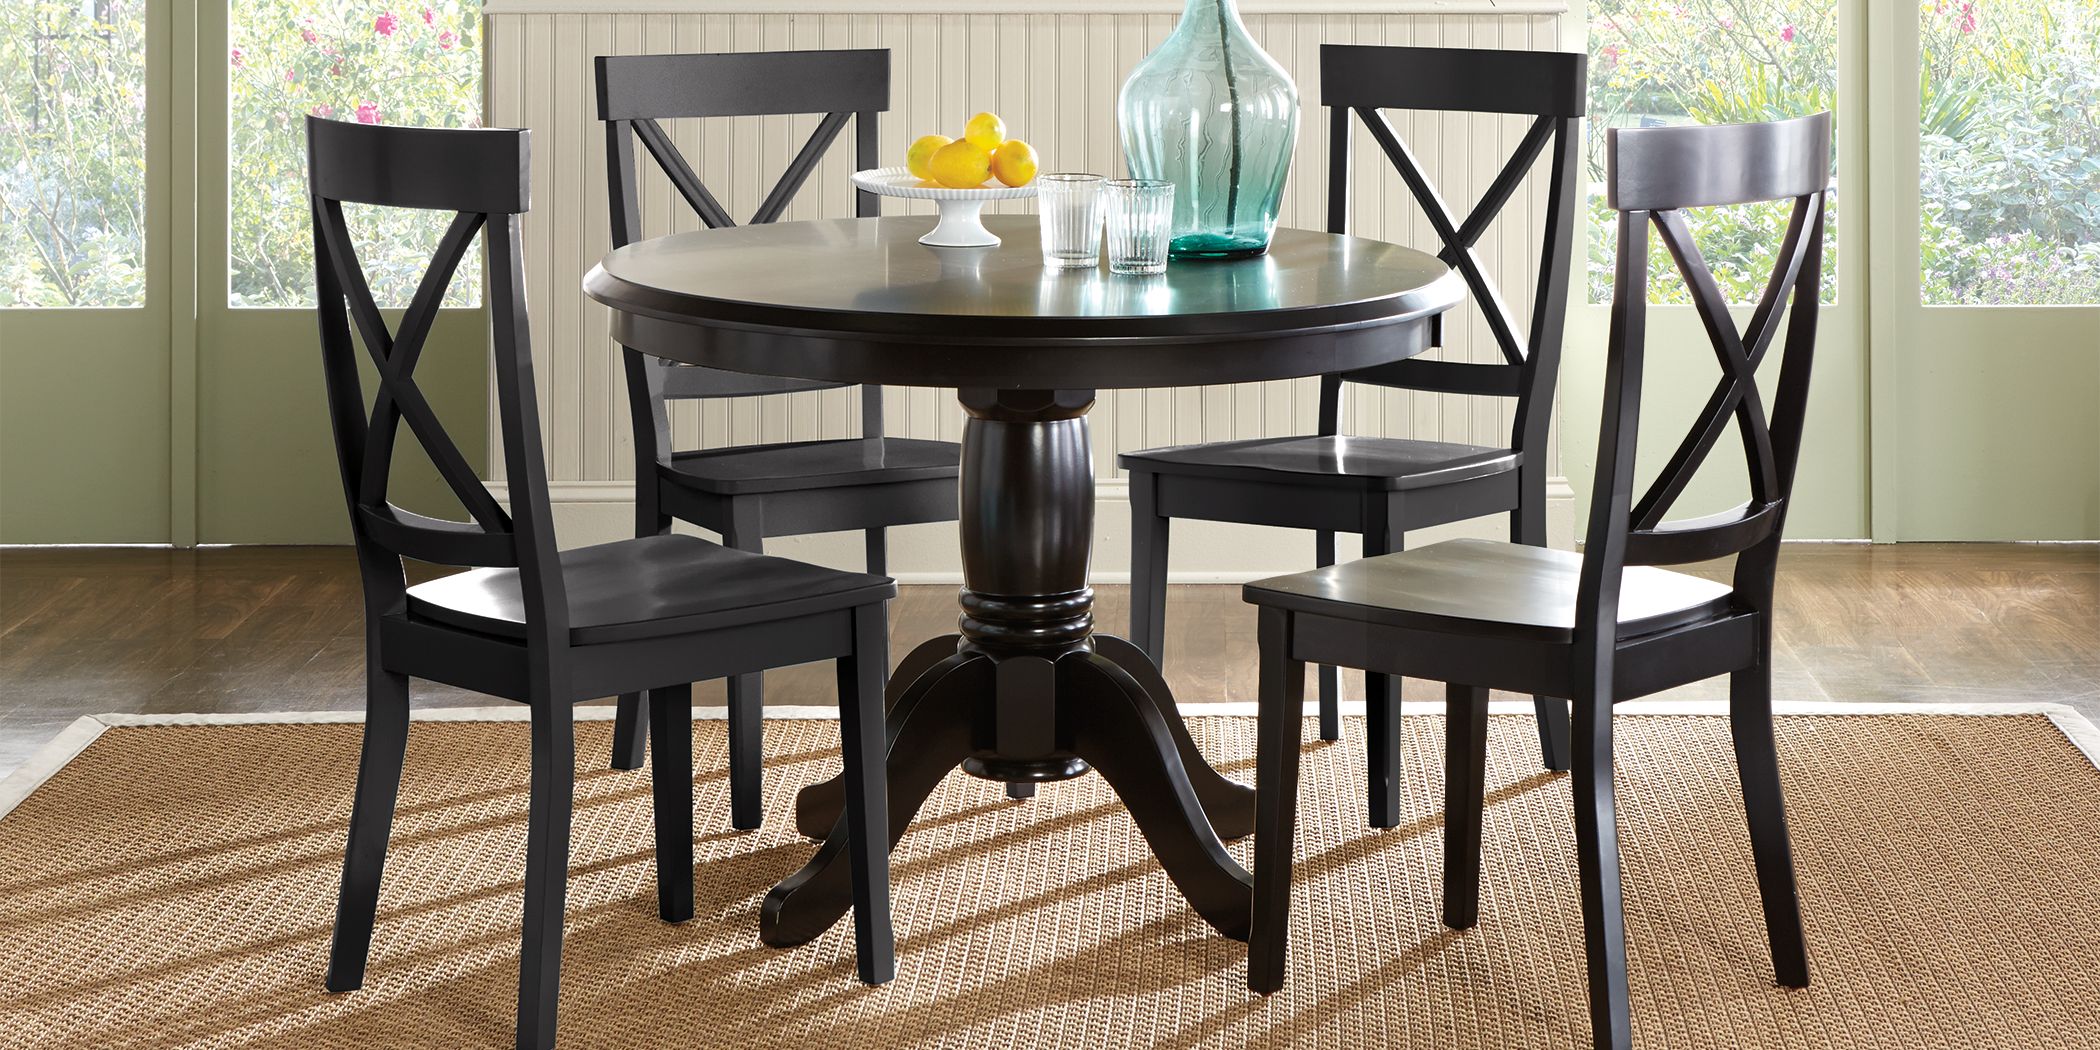 Dining Room Sets, Low Cost Dining Room Sets